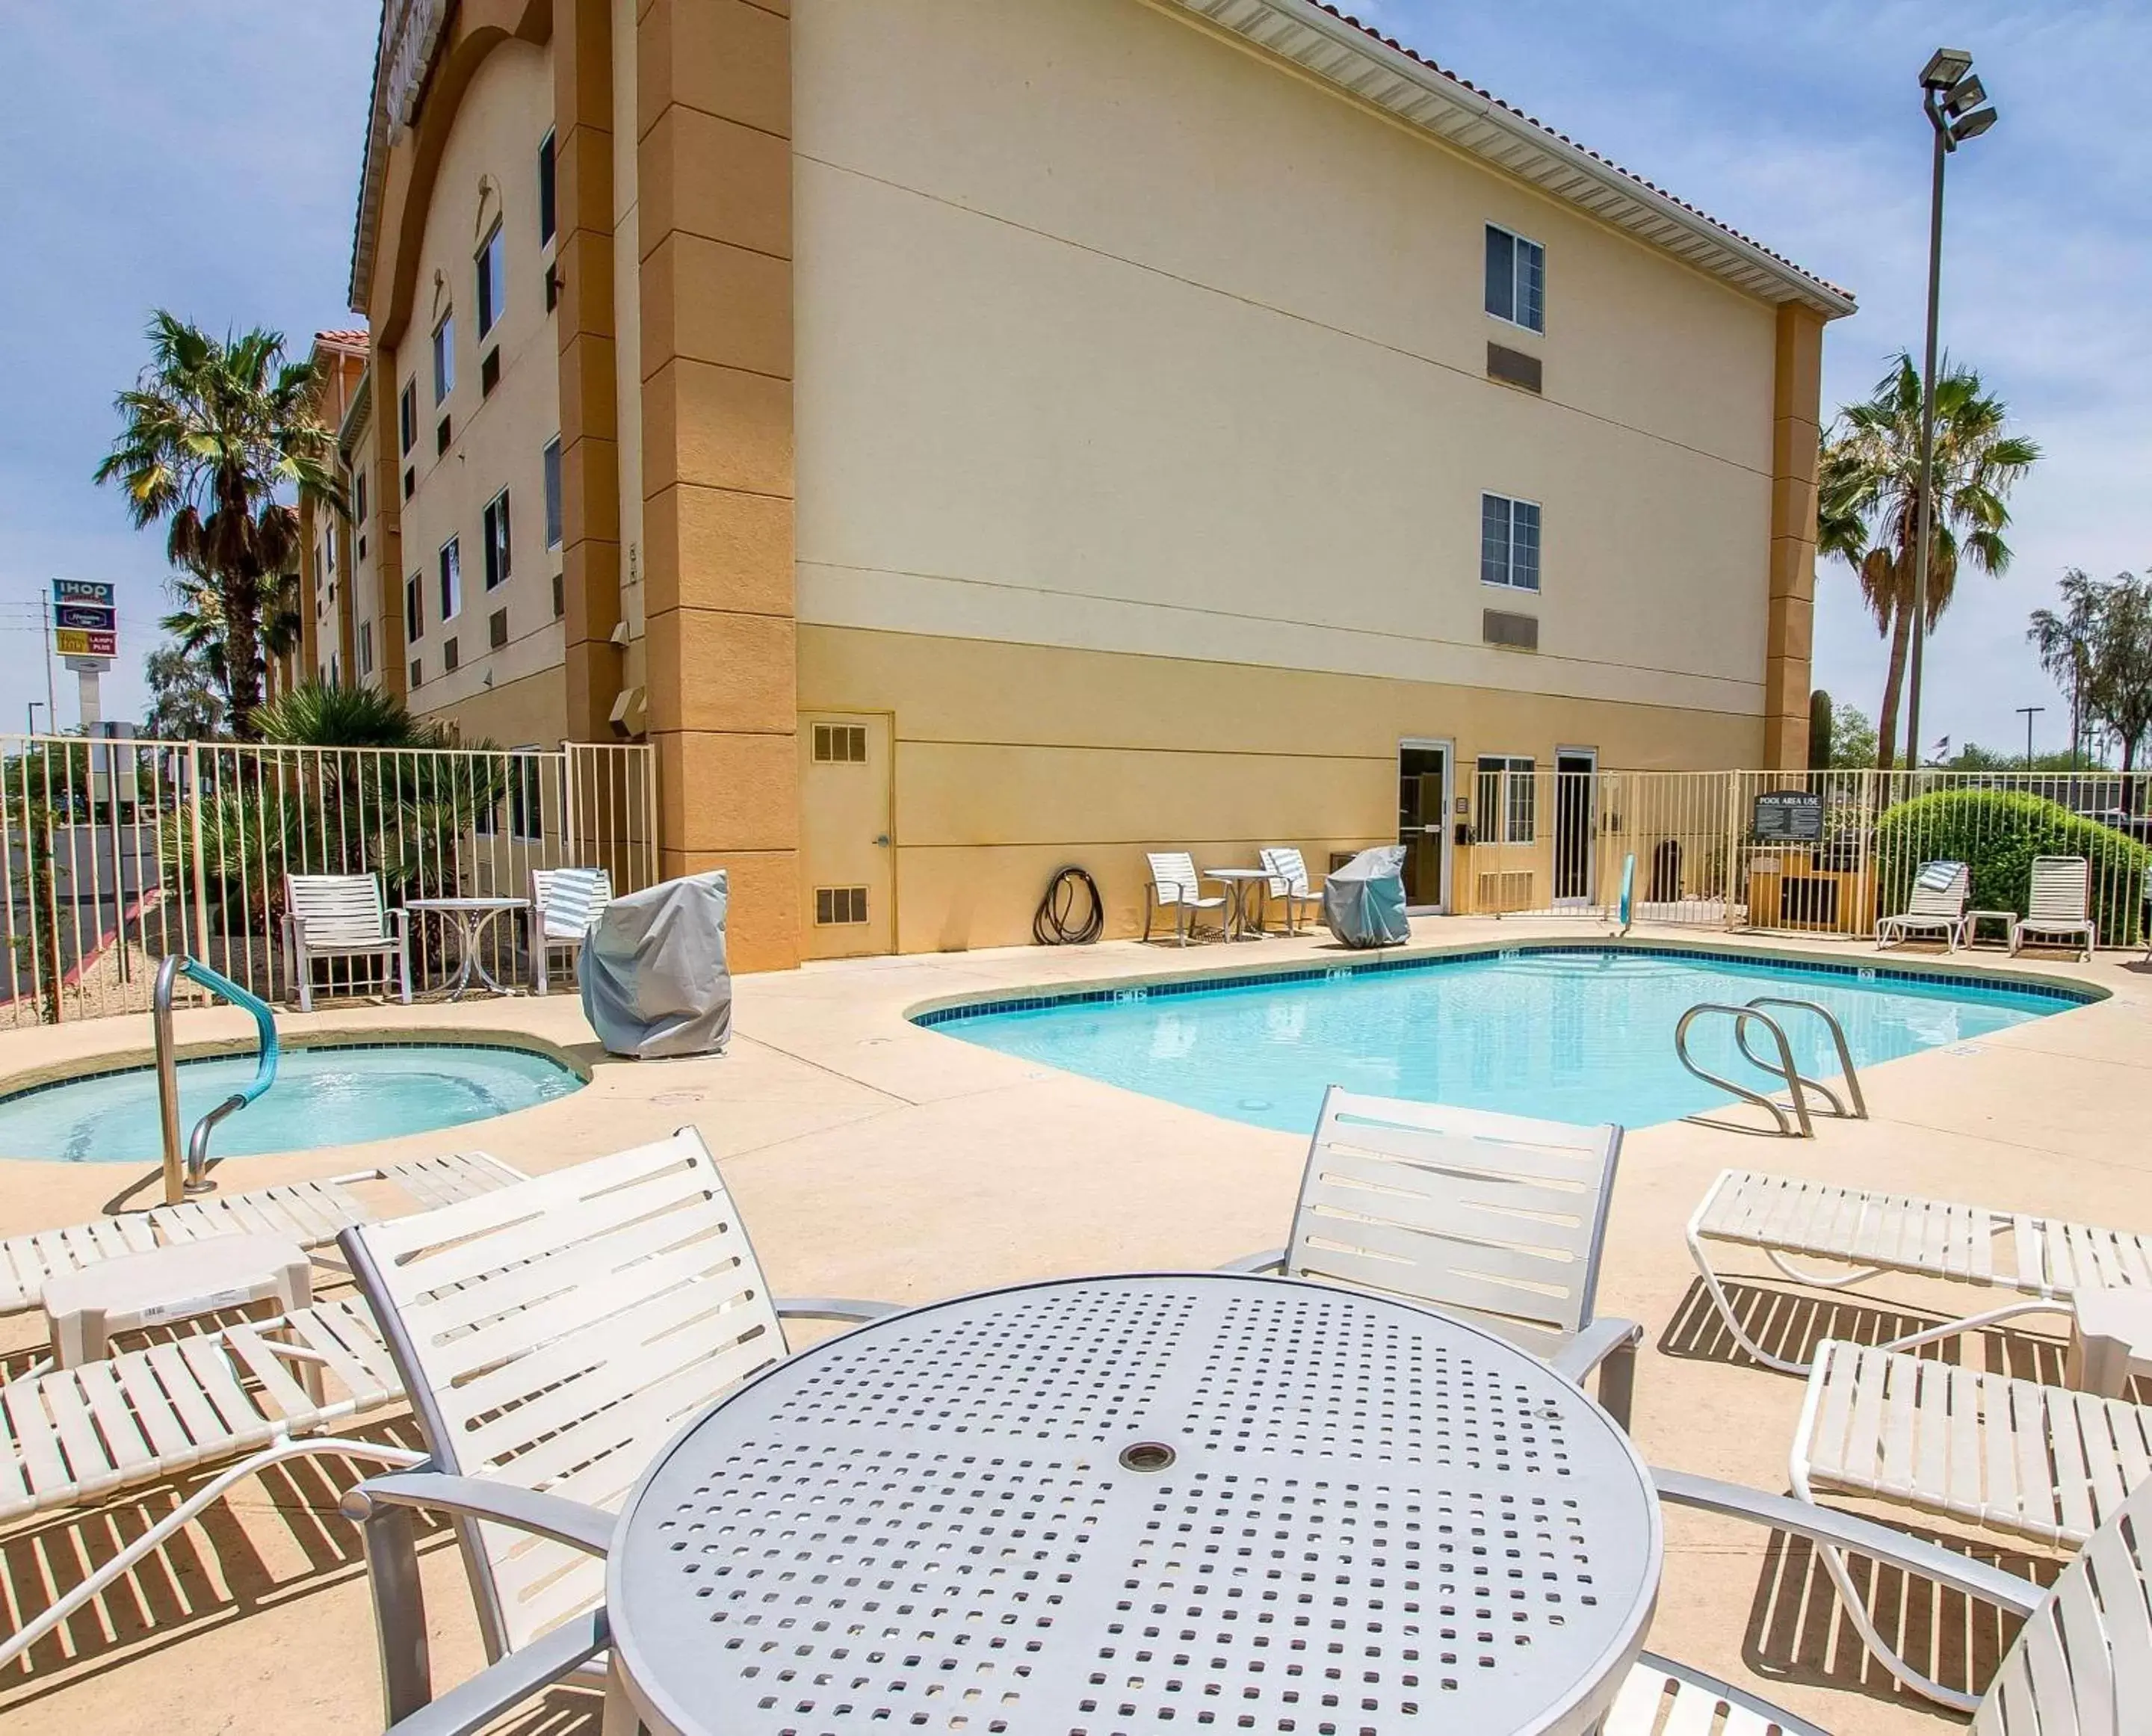 On site, Swimming Pool in Comfort Suites Peoria Sports Complex